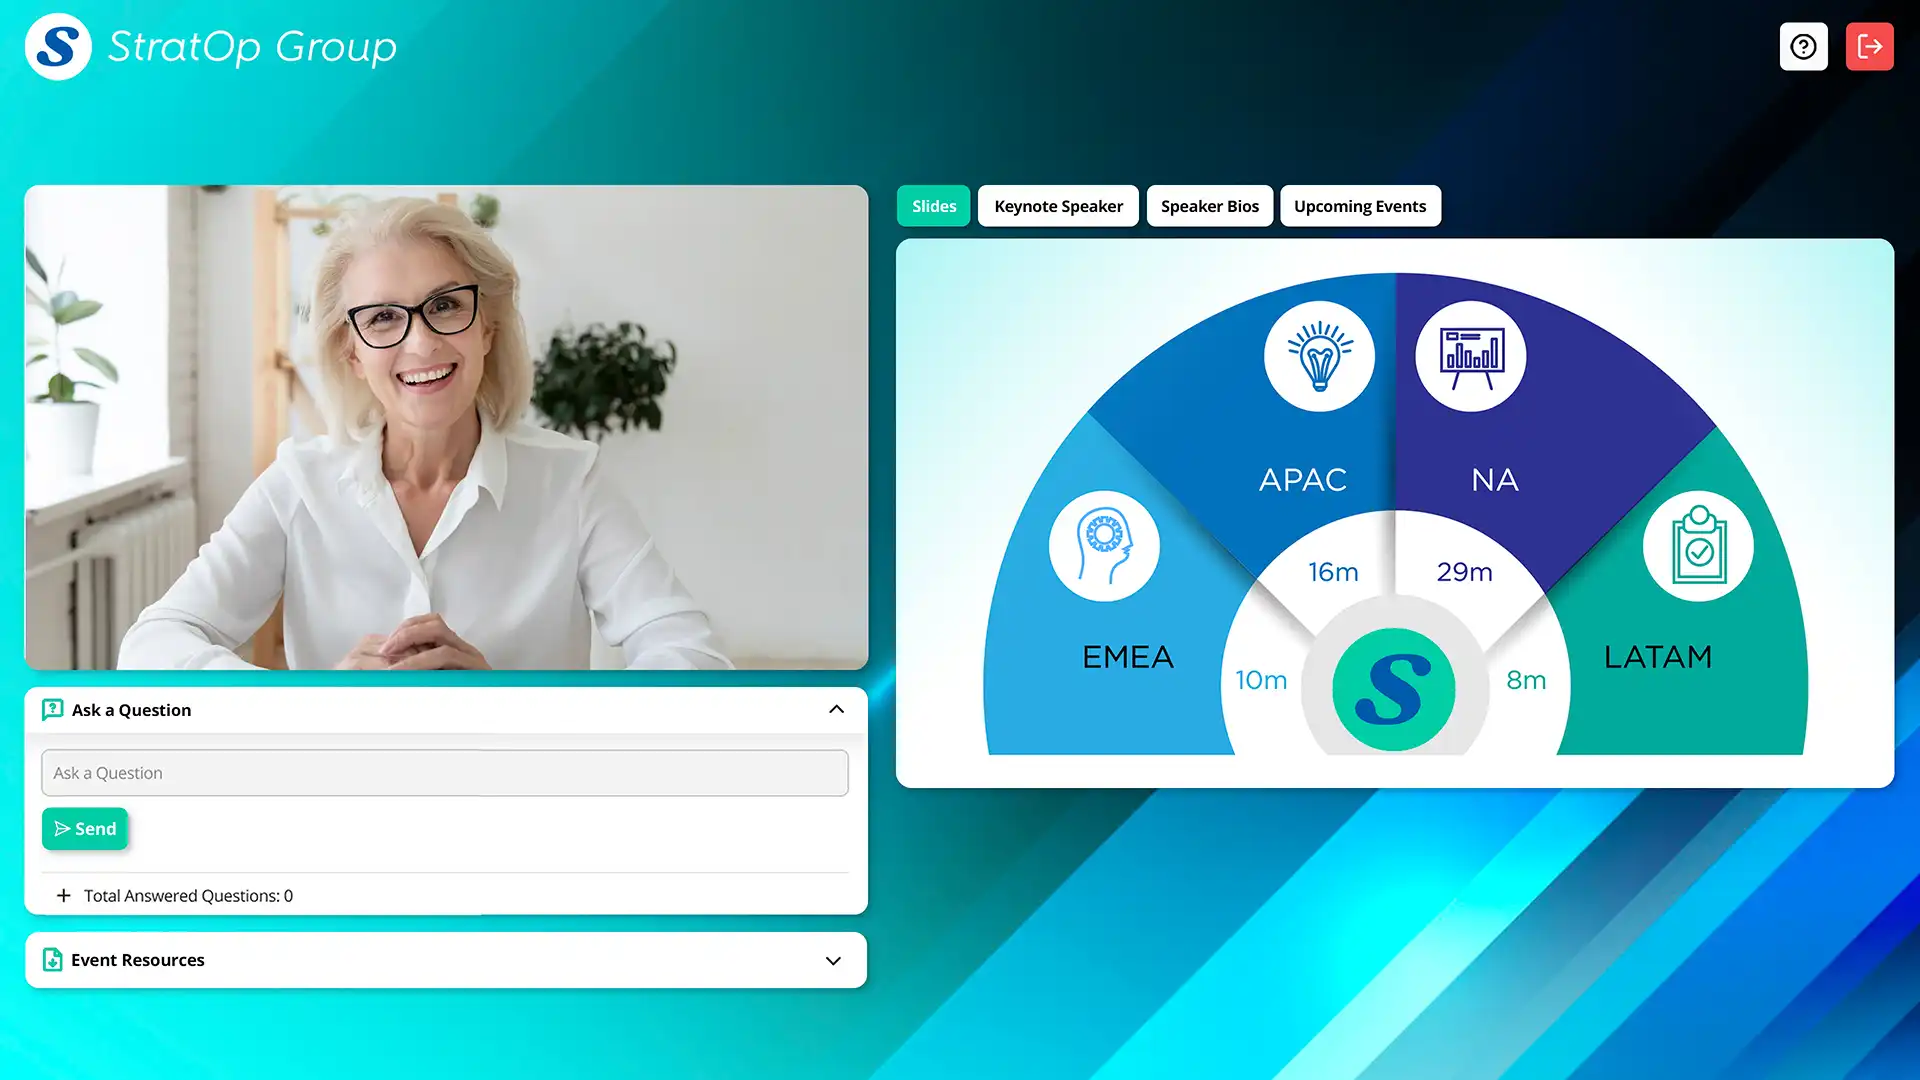 An example screen showing the capabilities of a town hall hosted on GlobalMeet